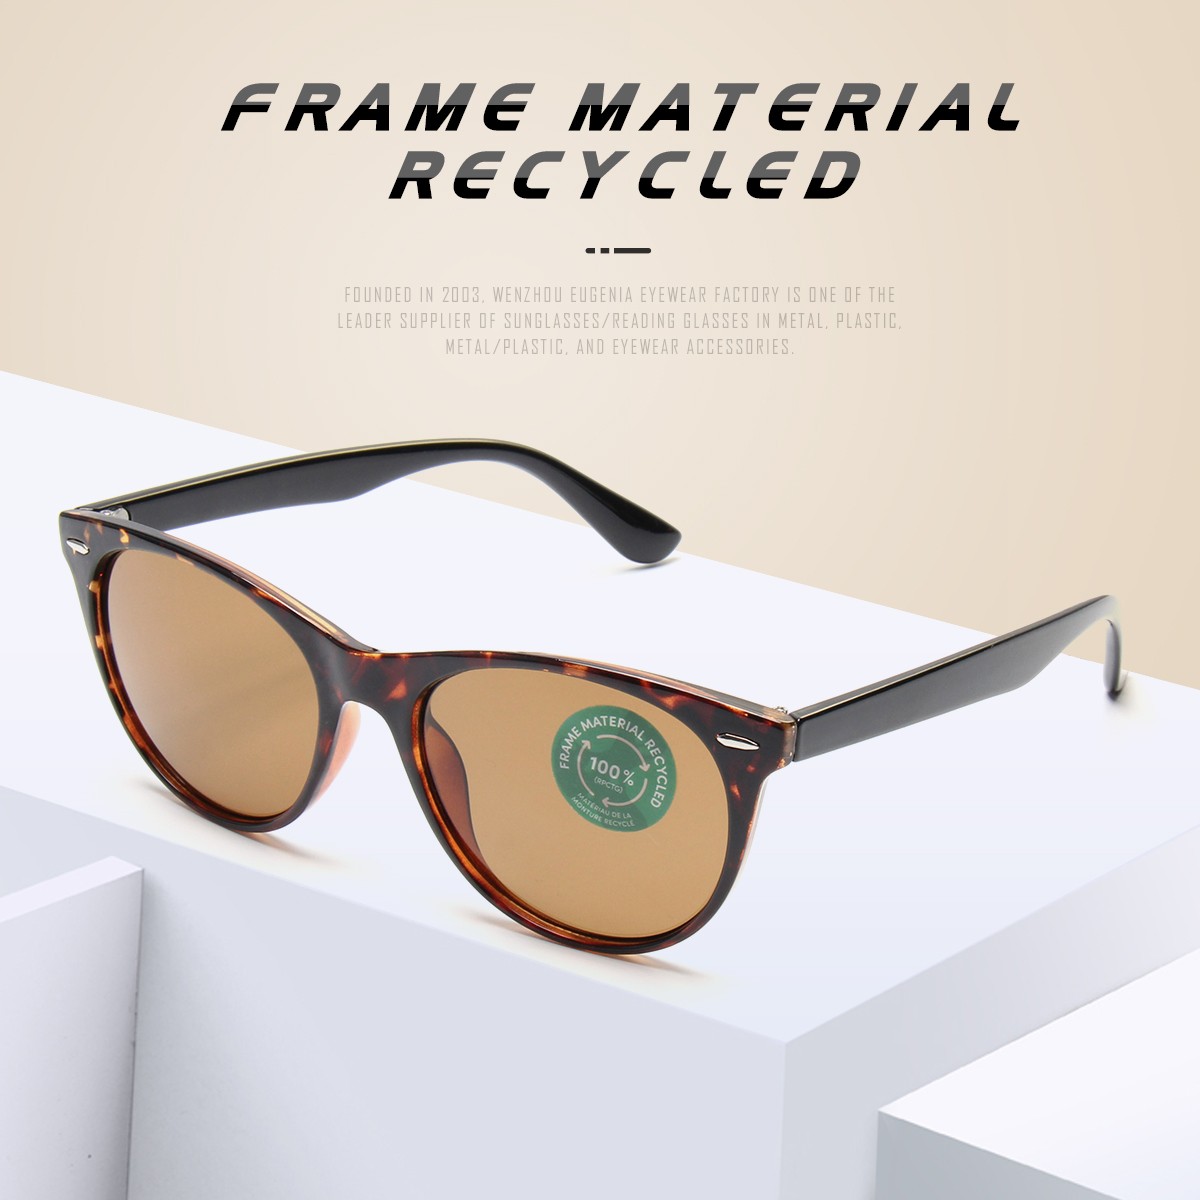 Eugenia environmentally friendly sunglasses for recycle-1